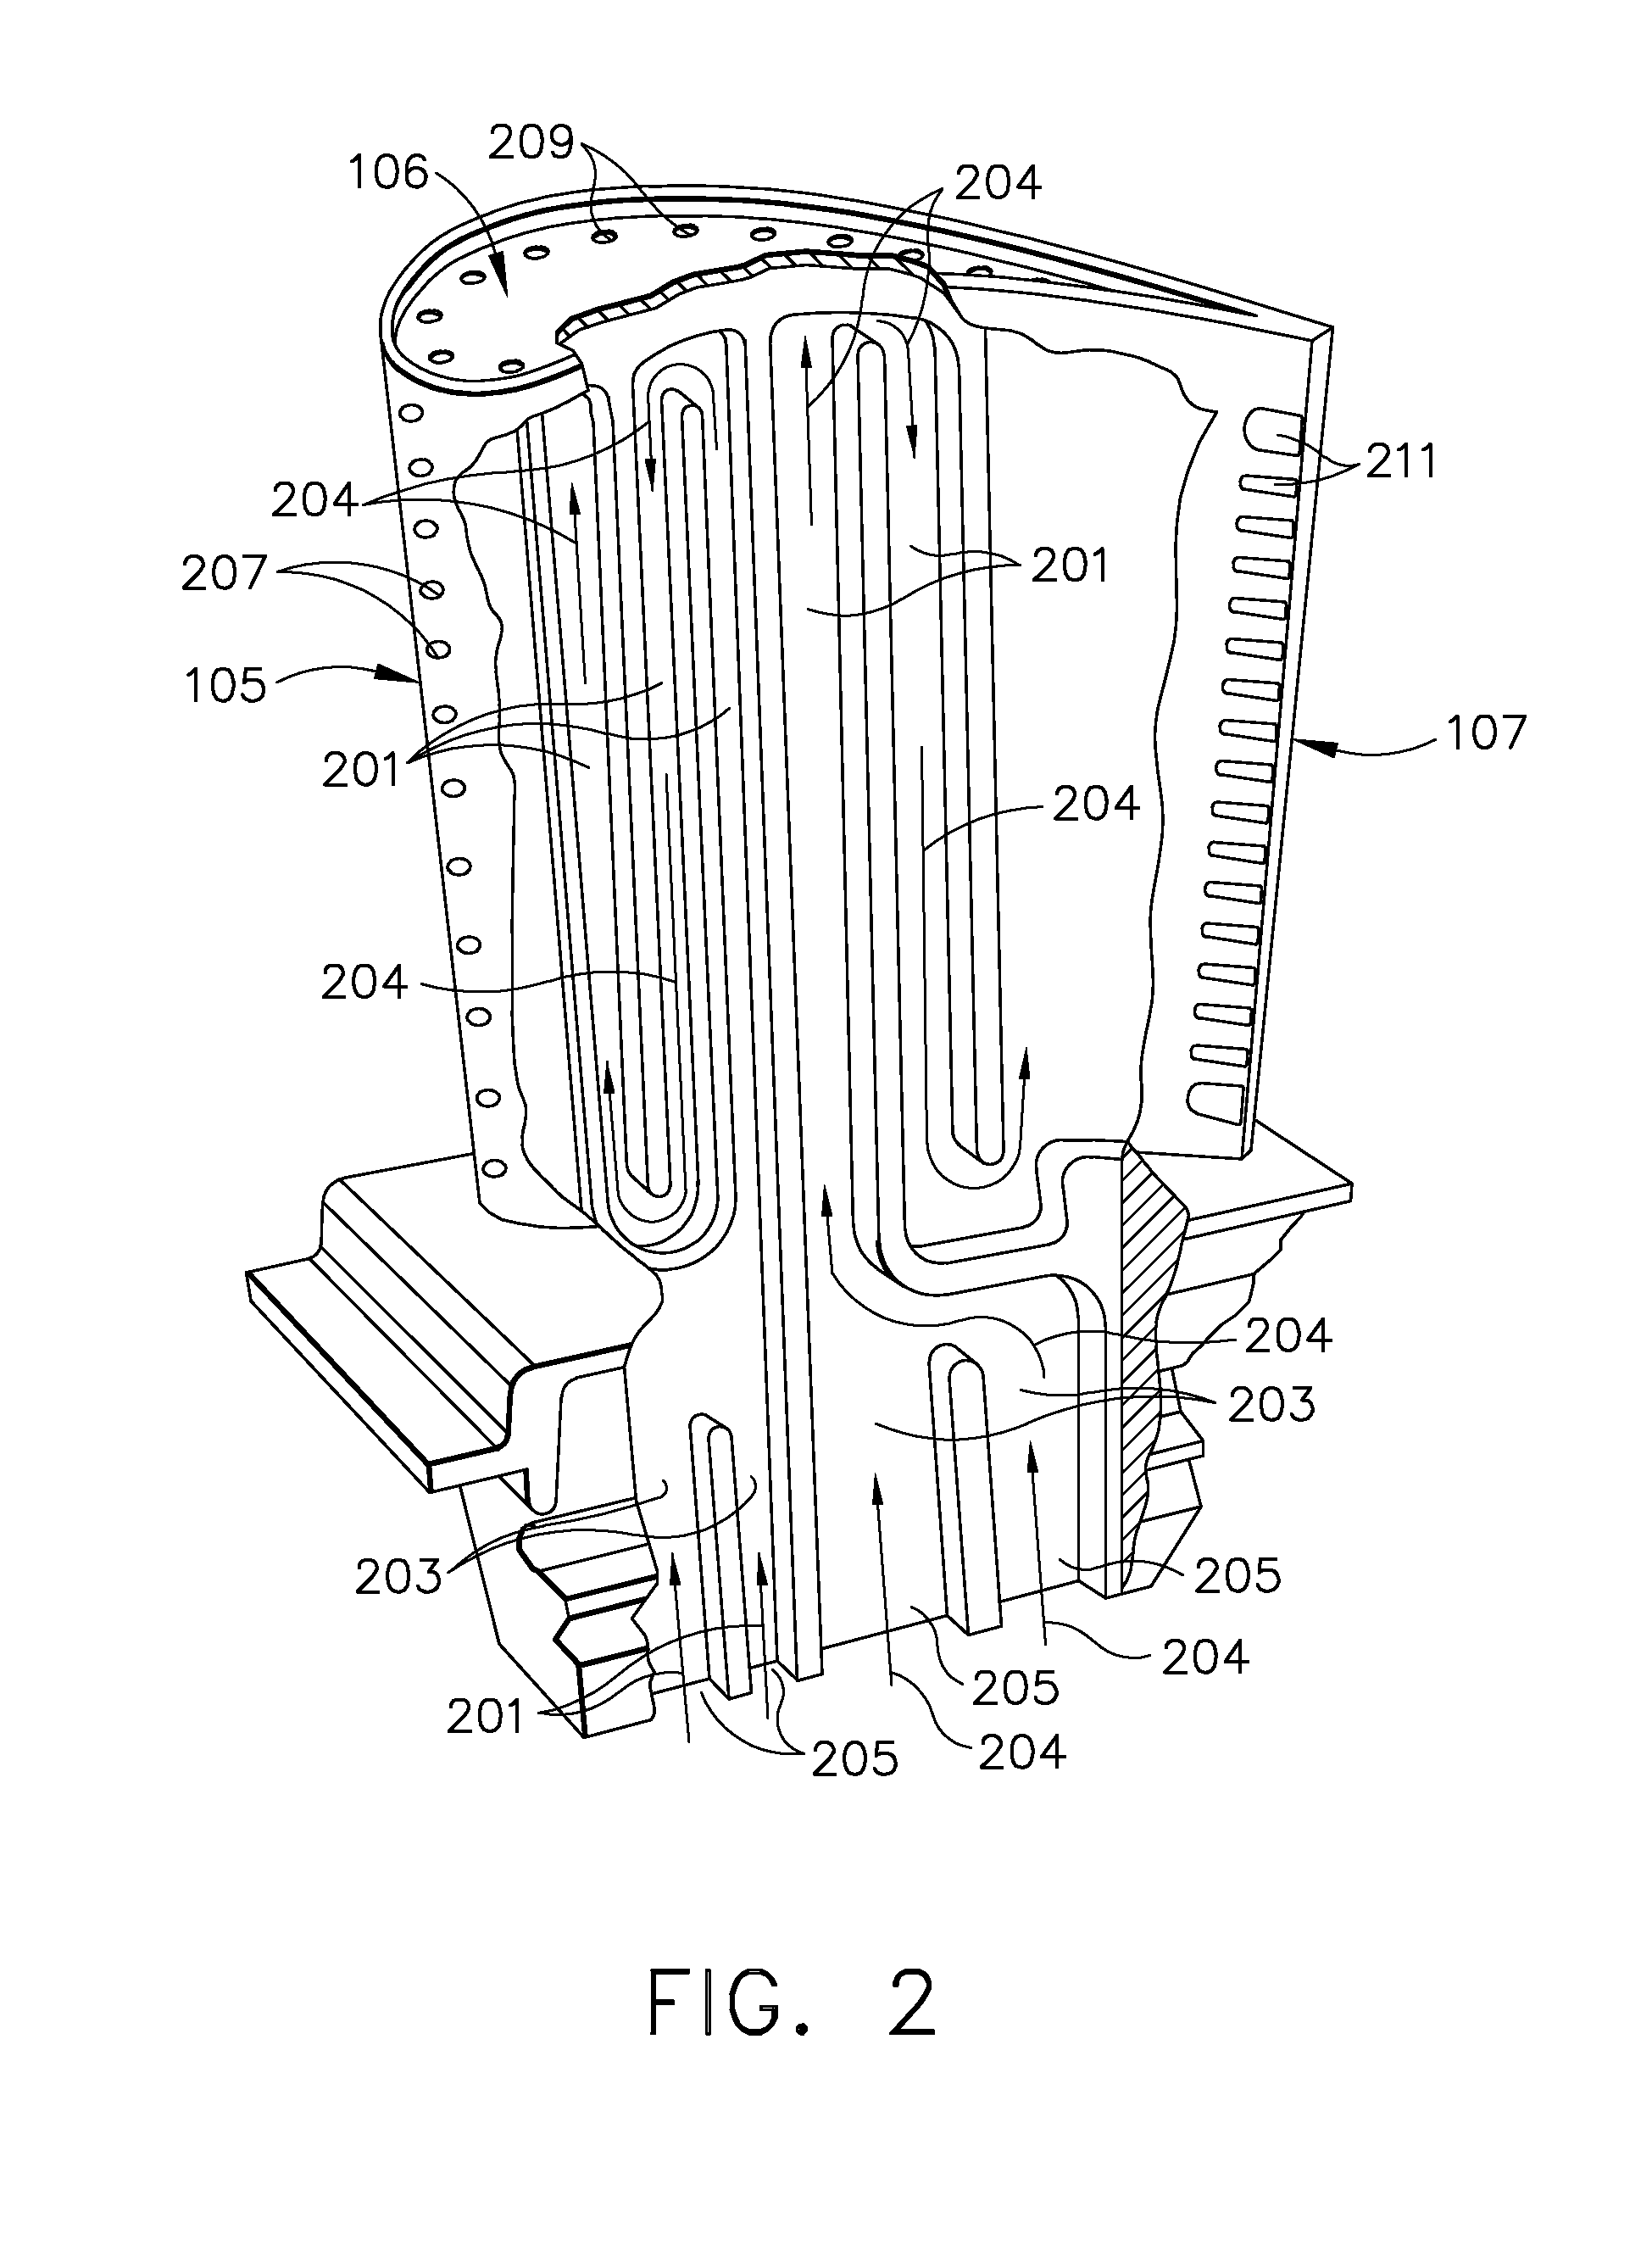 Cooled airfoil and method for making an airfoil having reduced trail edge slot flow